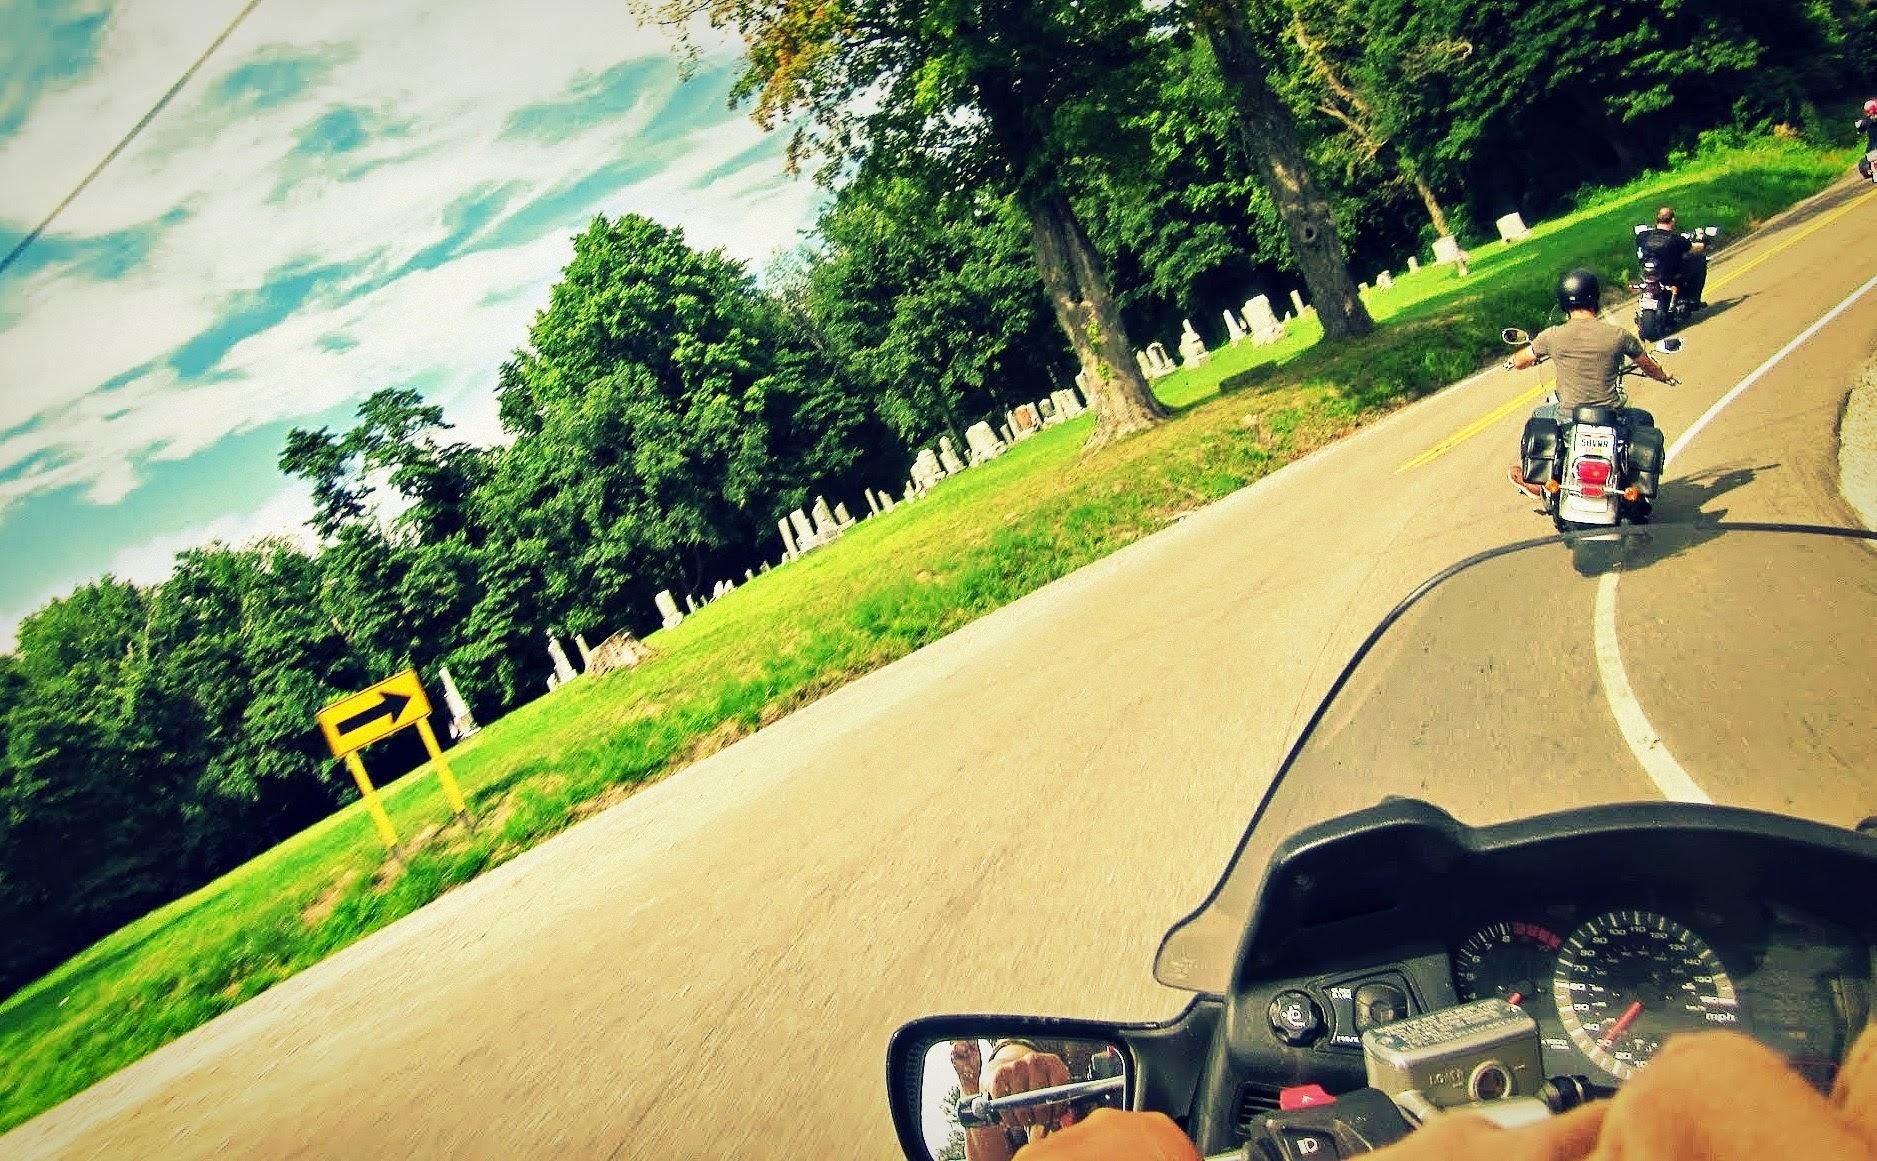 Riding Past Old Graveyards